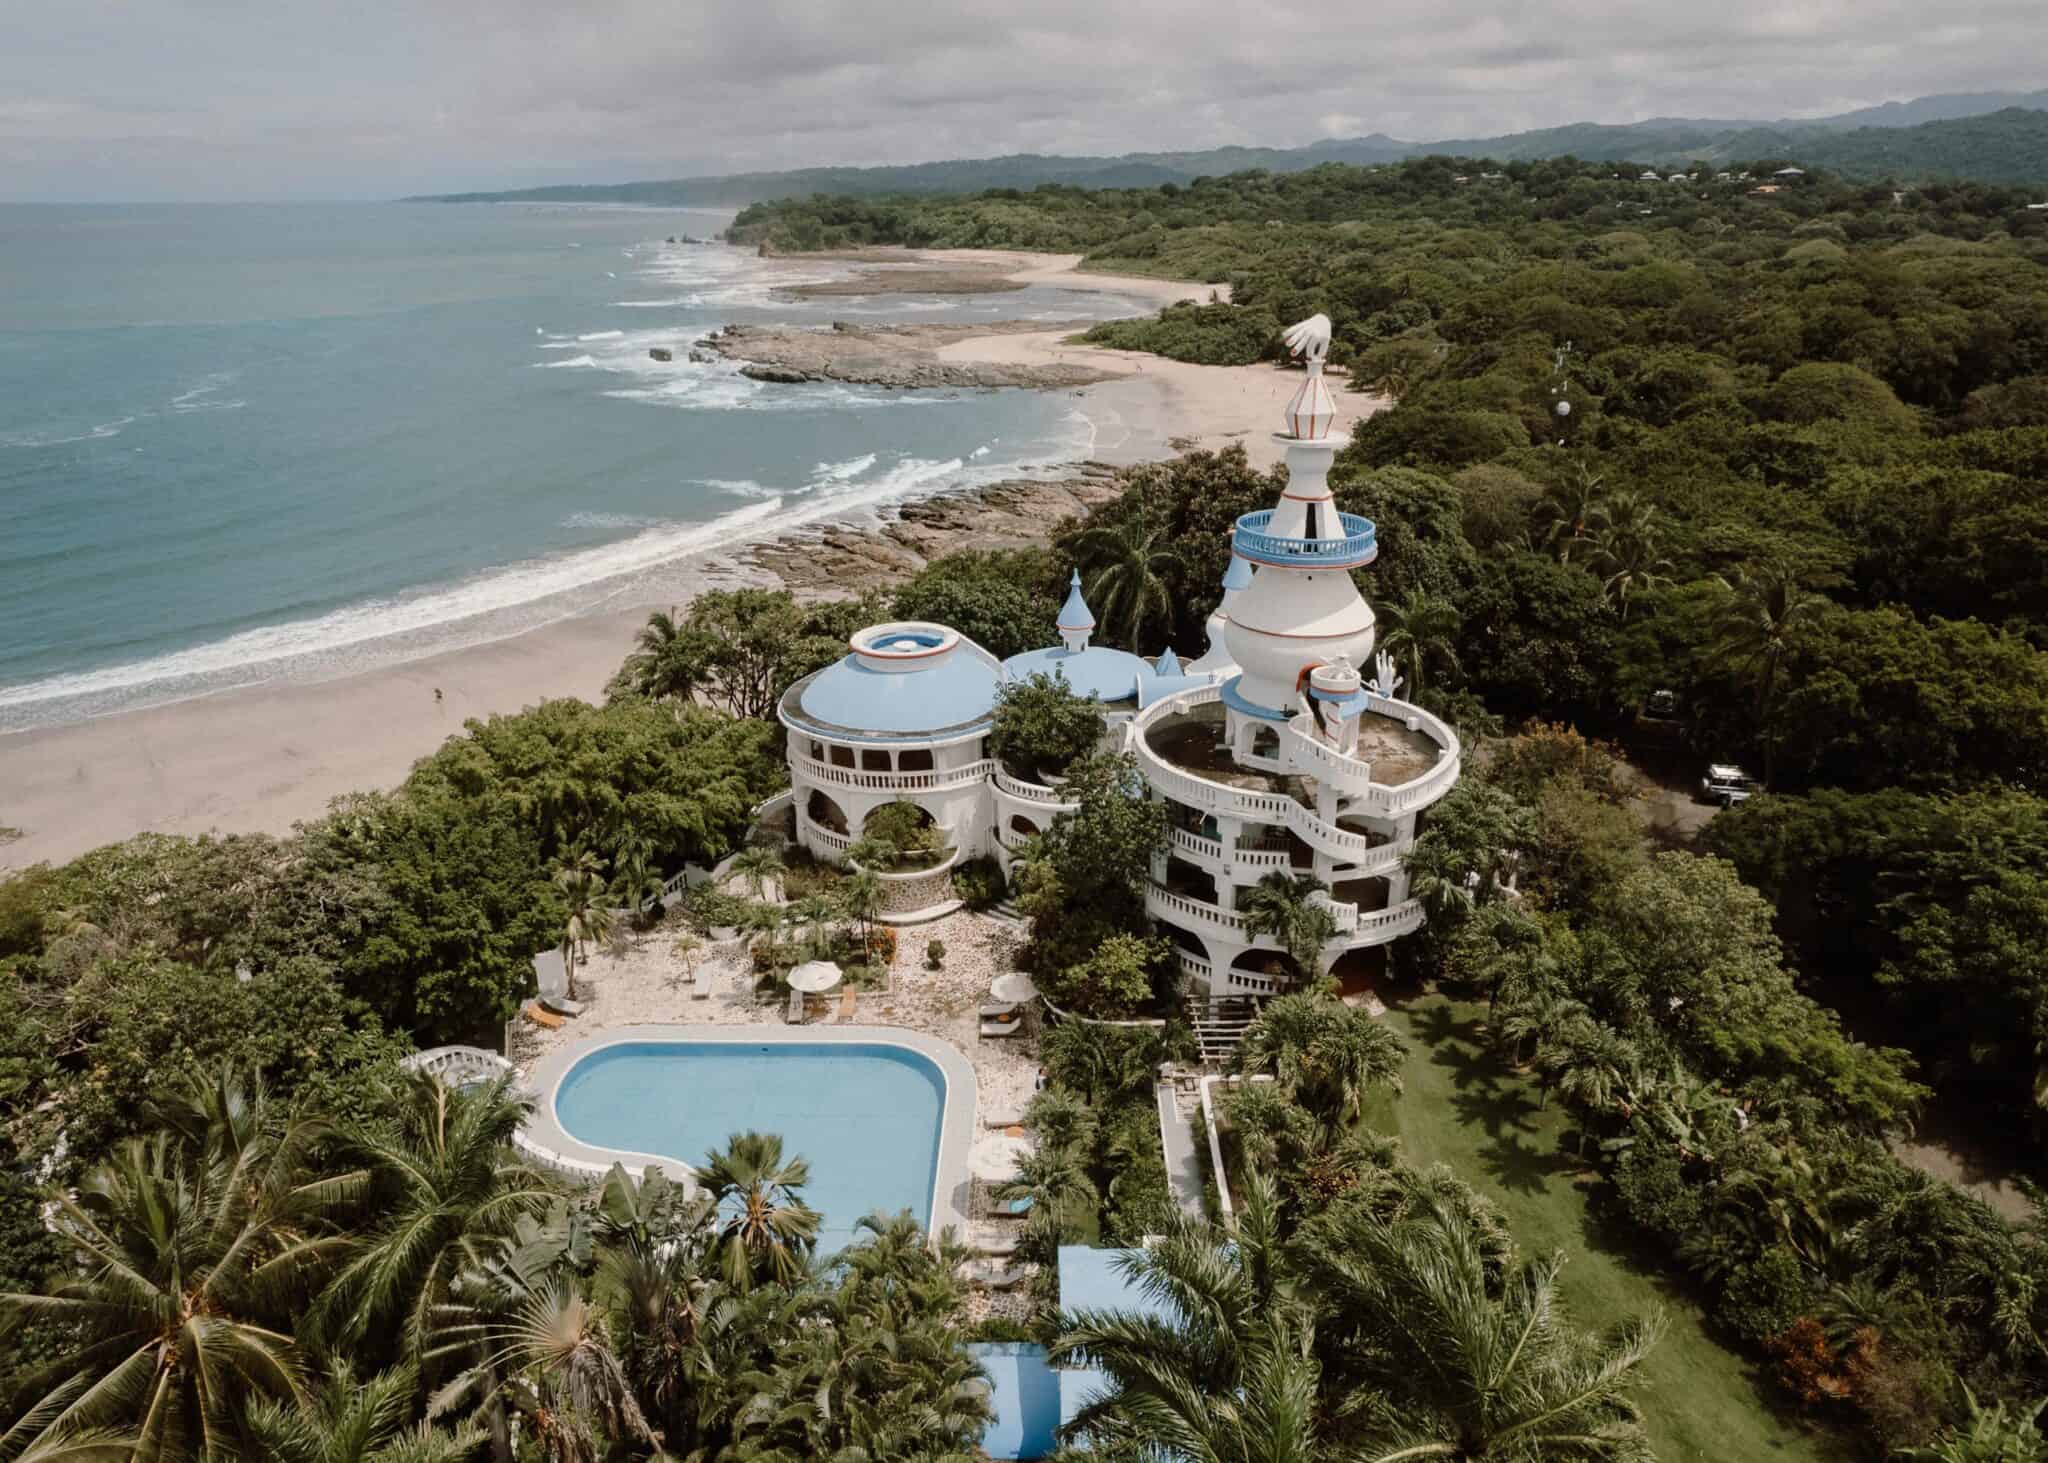 An aerial view of a house on the beach in Nosara, Costa Rica.